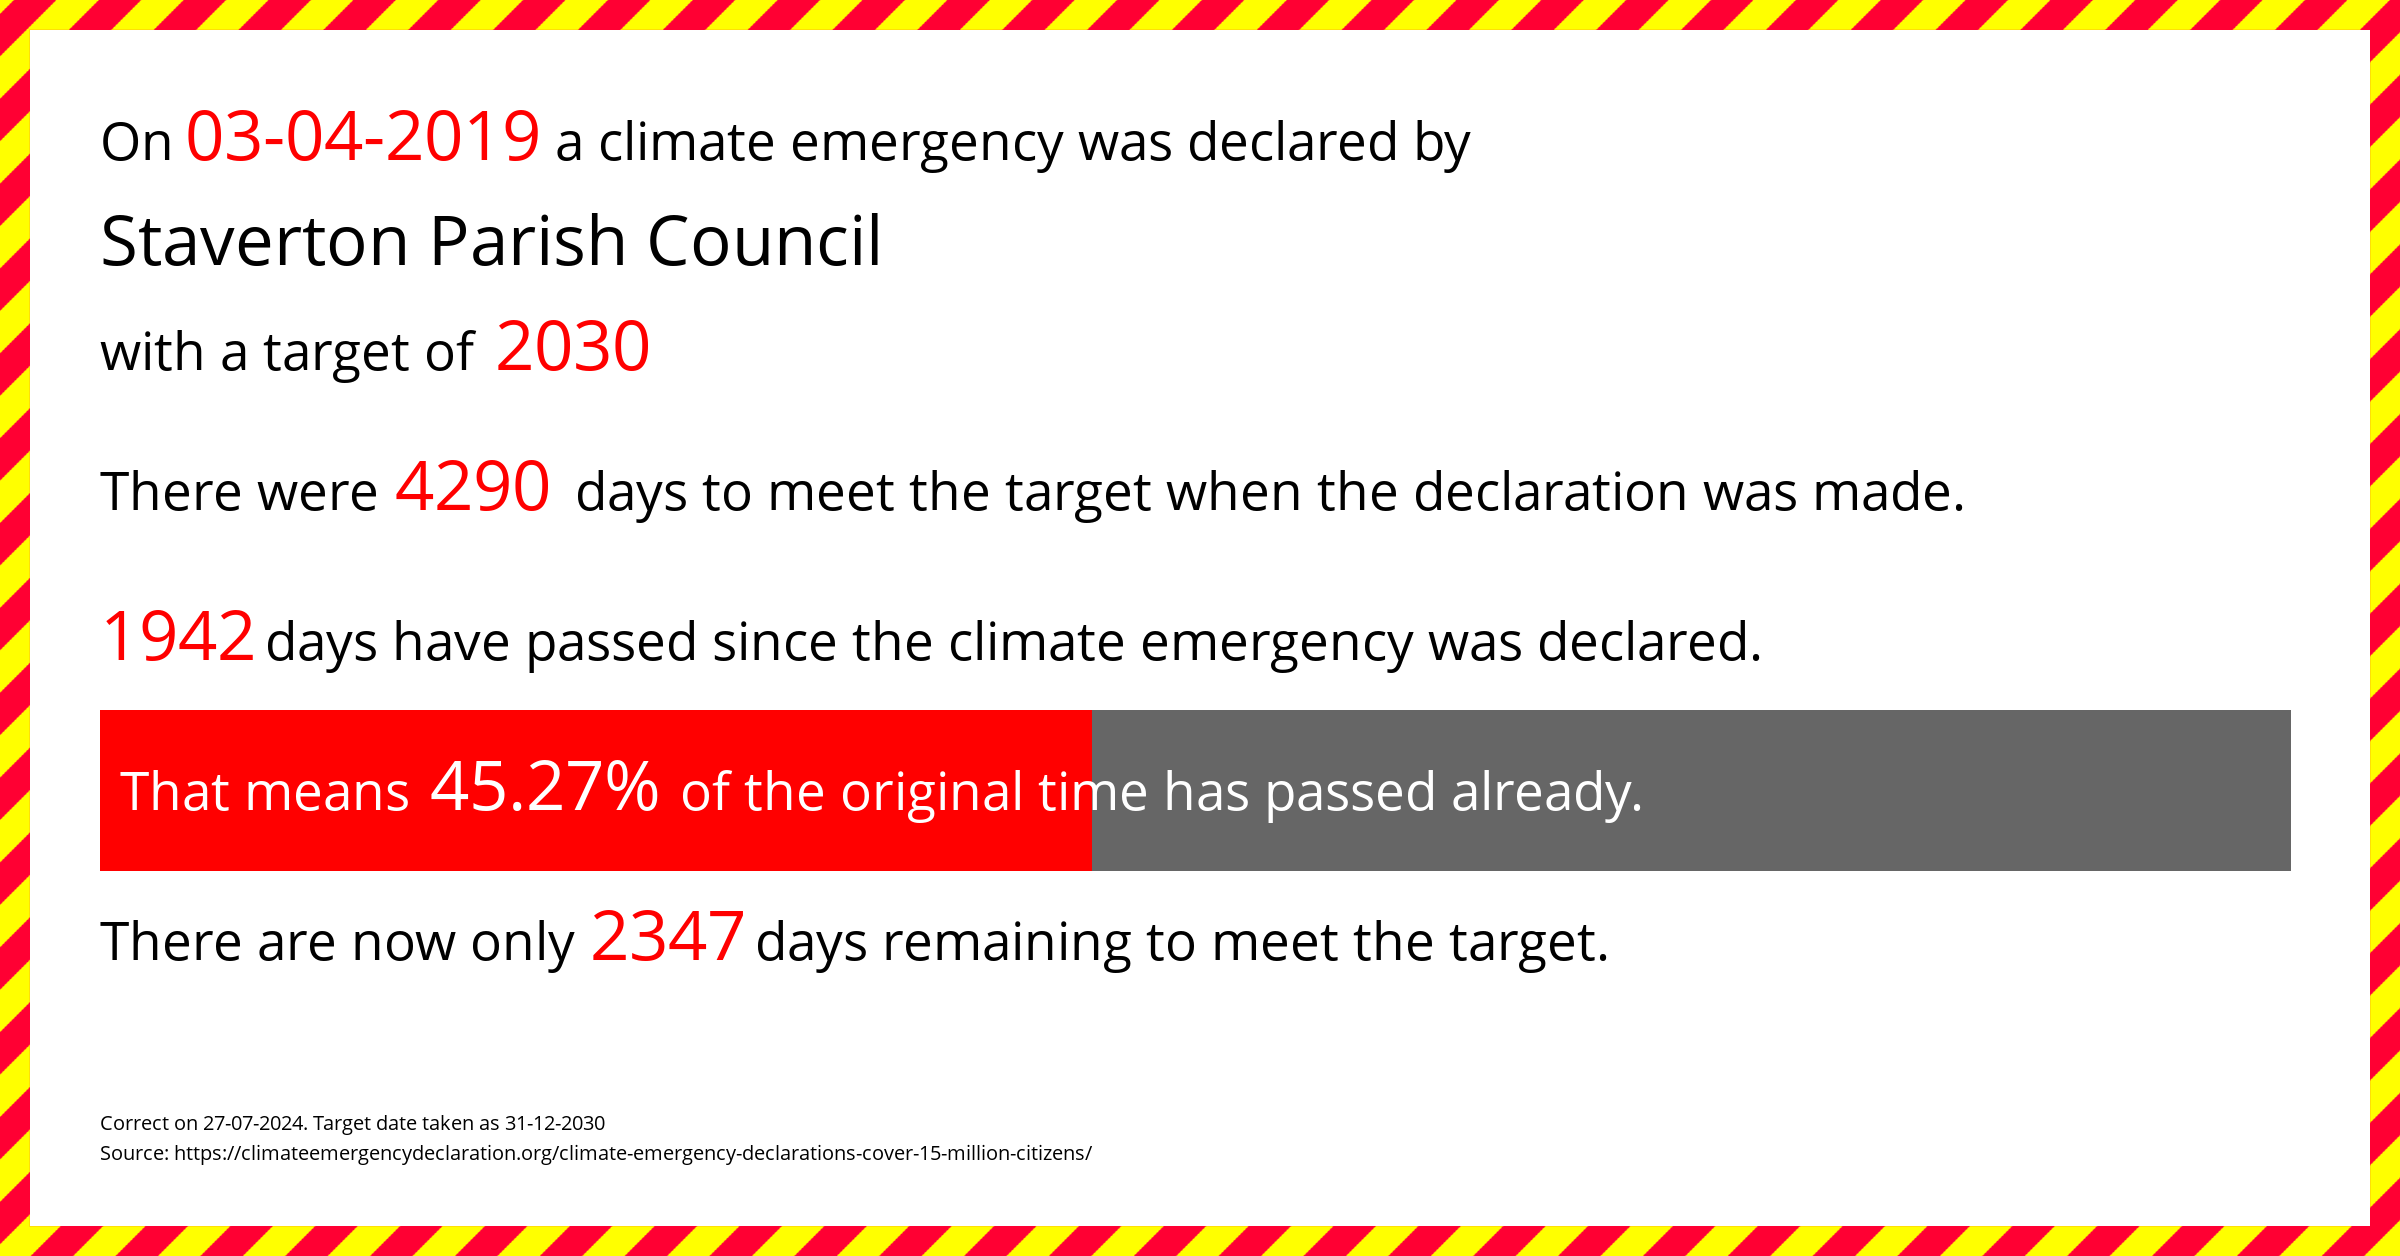 Staverton Parish Council  declared a Climate emergency on Wednesday 3rd April 2019, with a target of 2030.